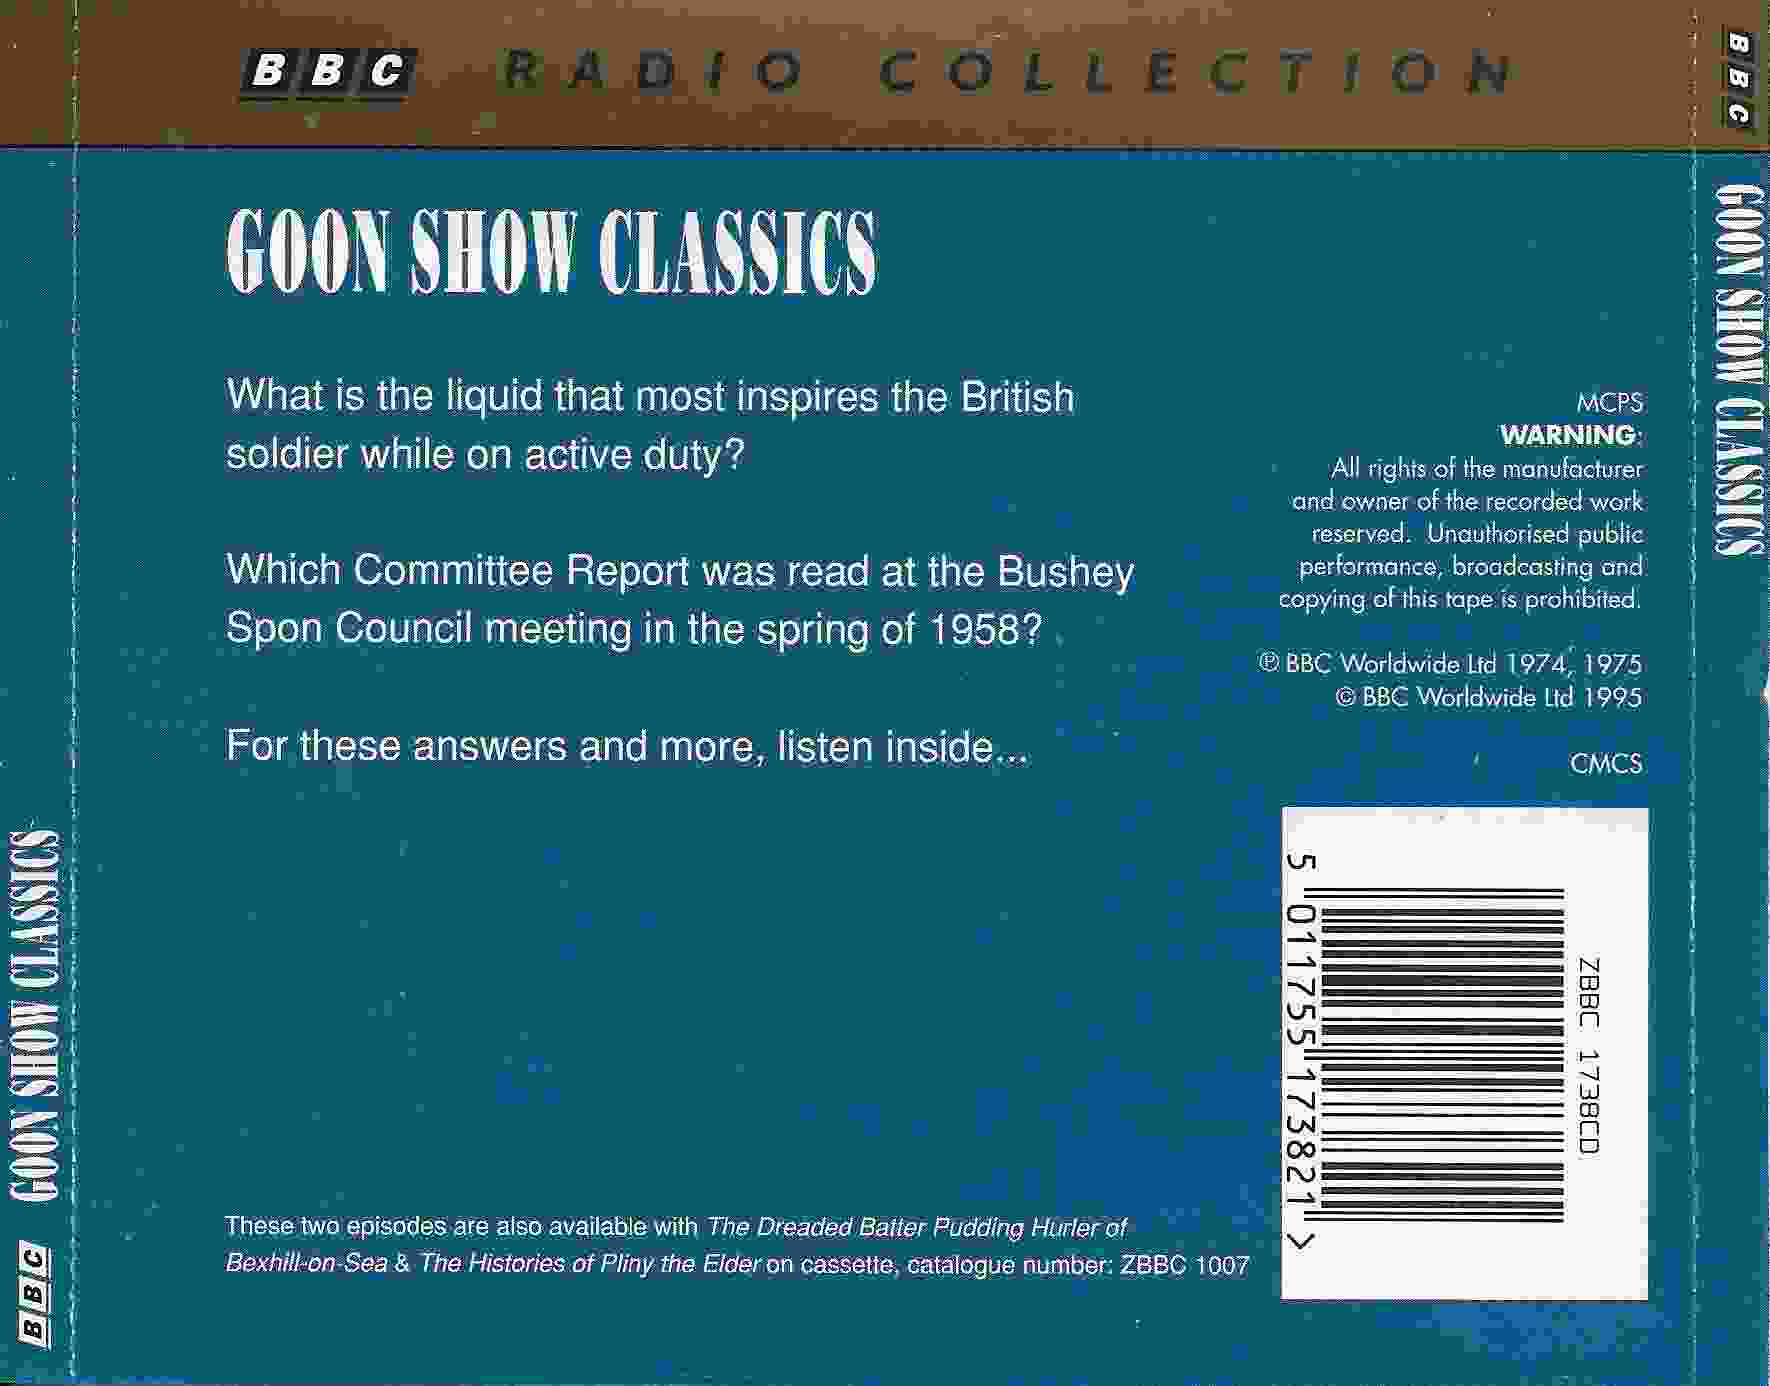 Picture of ZBBC 1738 CD Goon show classics by artist Spike Milligan from the BBC records and Tapes library